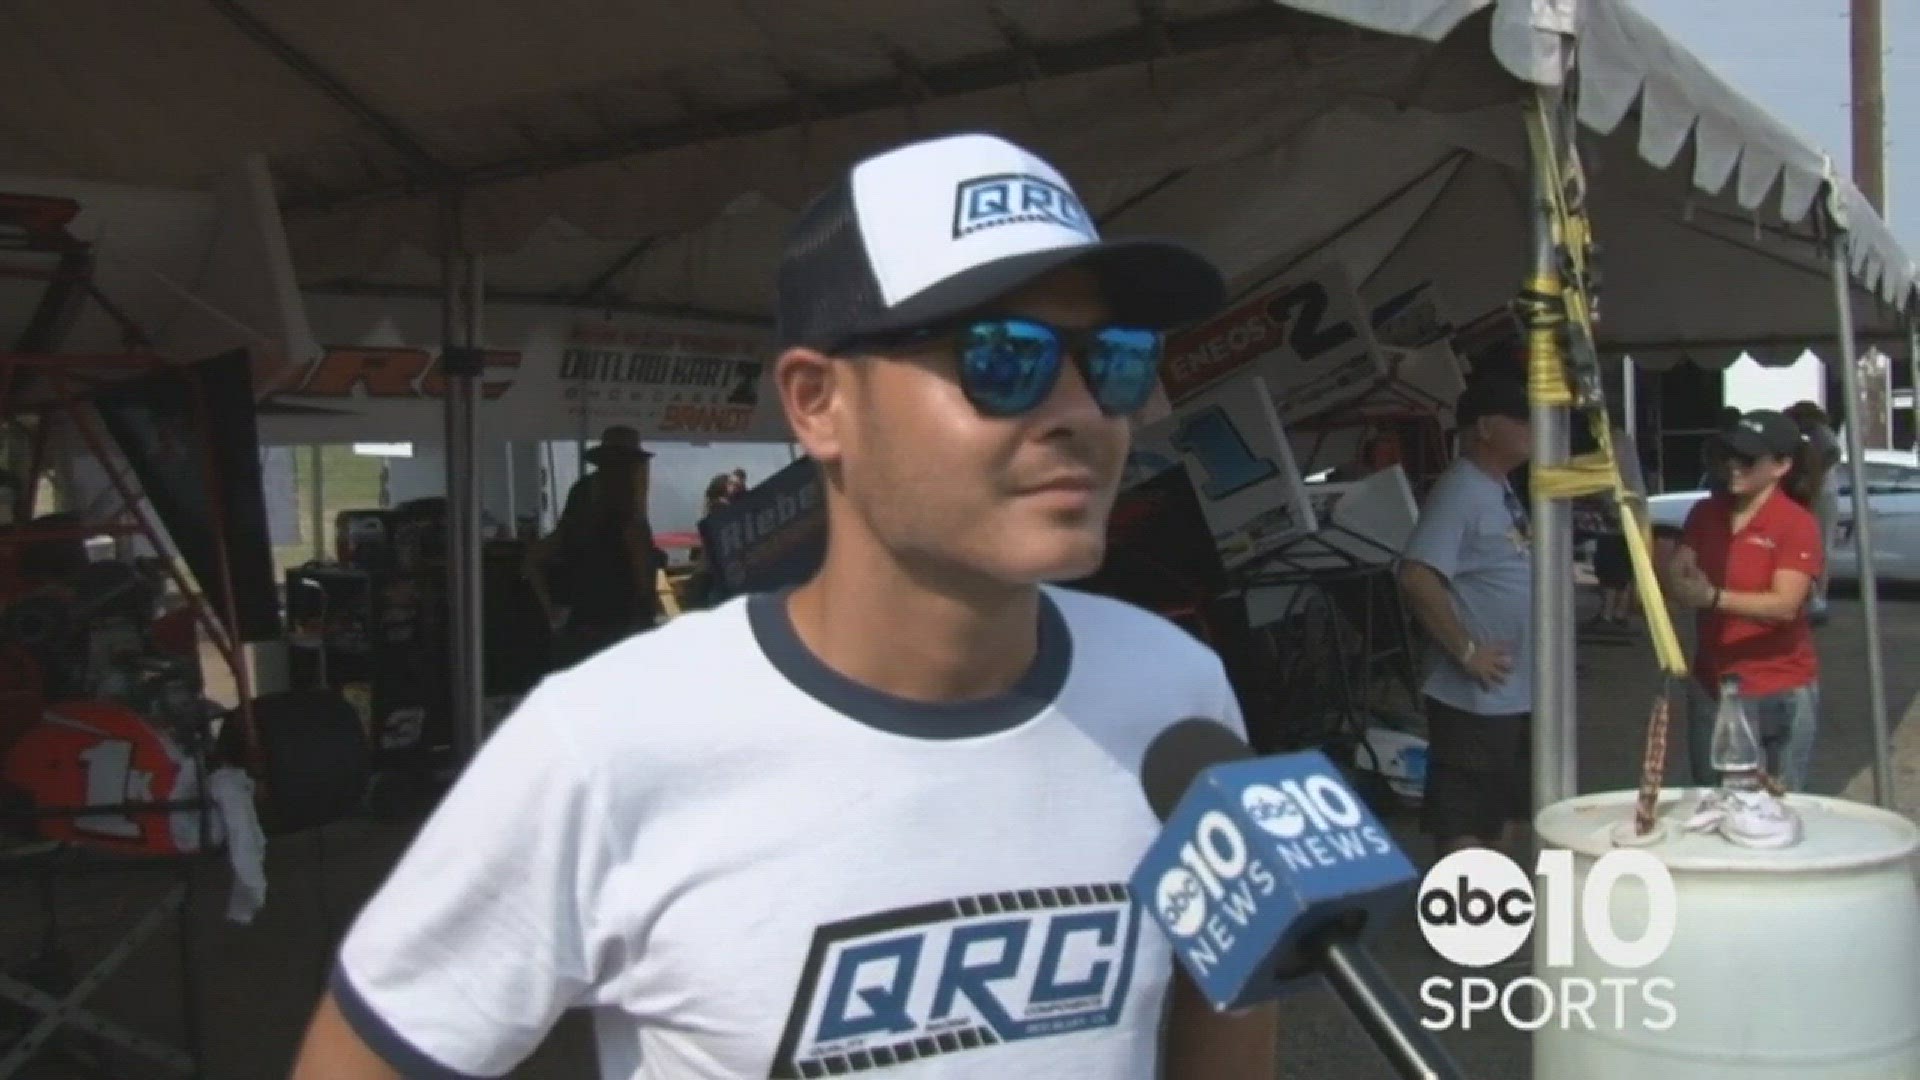 Elk Grove product Kyle Larson takes a break from his successful NASCAR season to return to Northern California for his third annual Outlaw Kart Showcase at Cycleland Speedway in Chico.